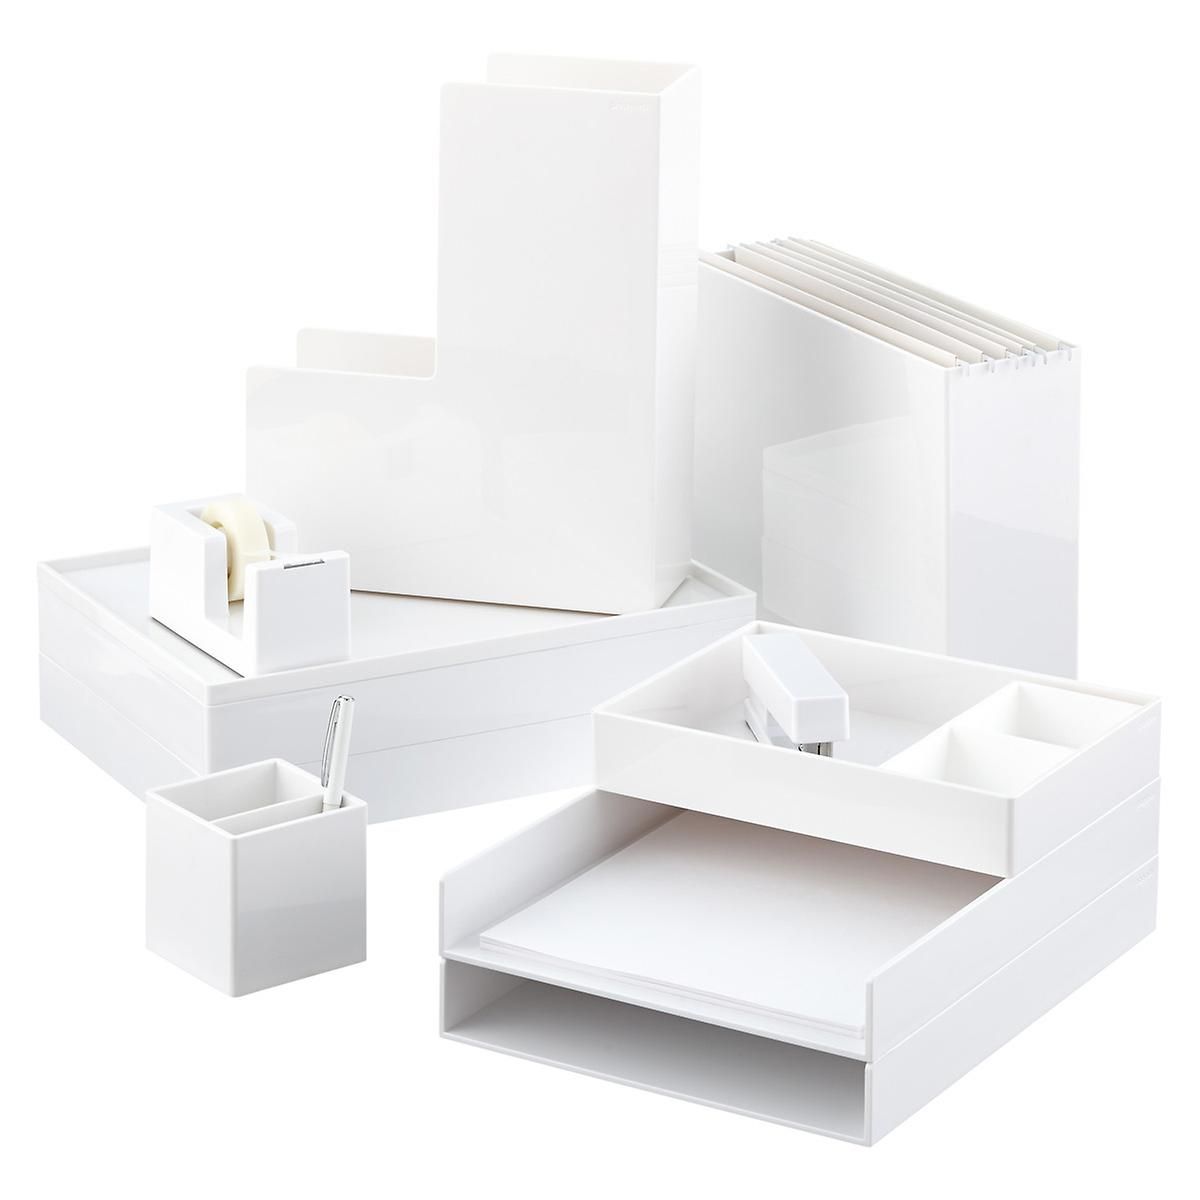 Poppin Small Accessory Tray White | The Container Store